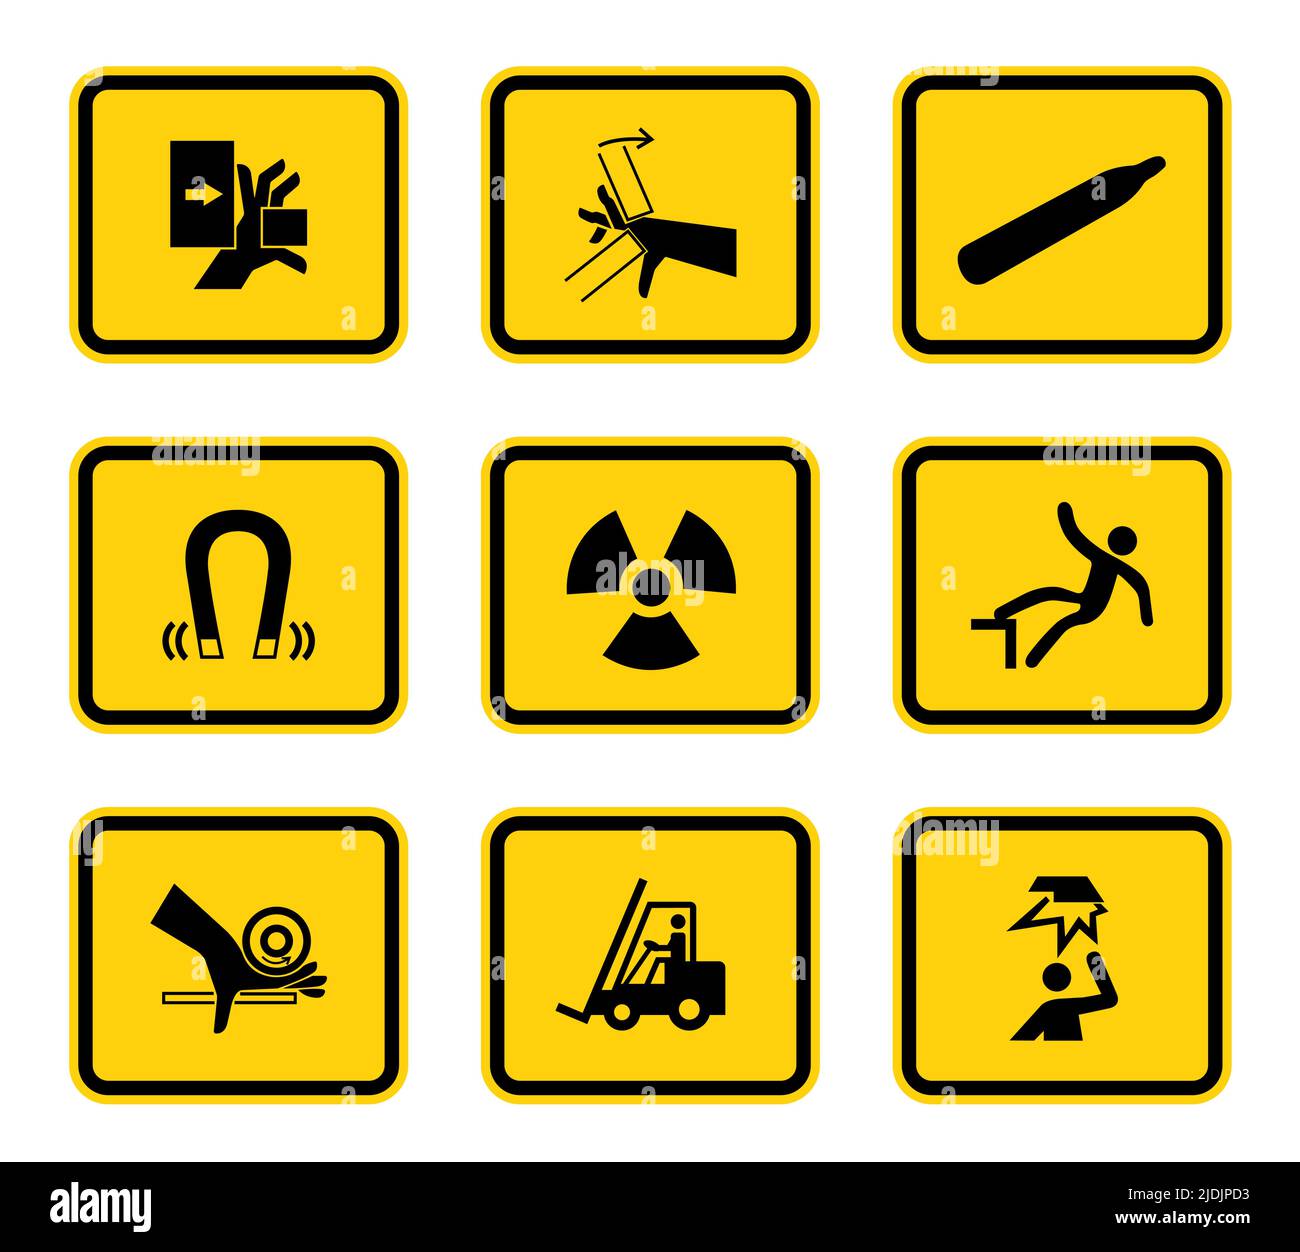 kitchen safety signs and symbols